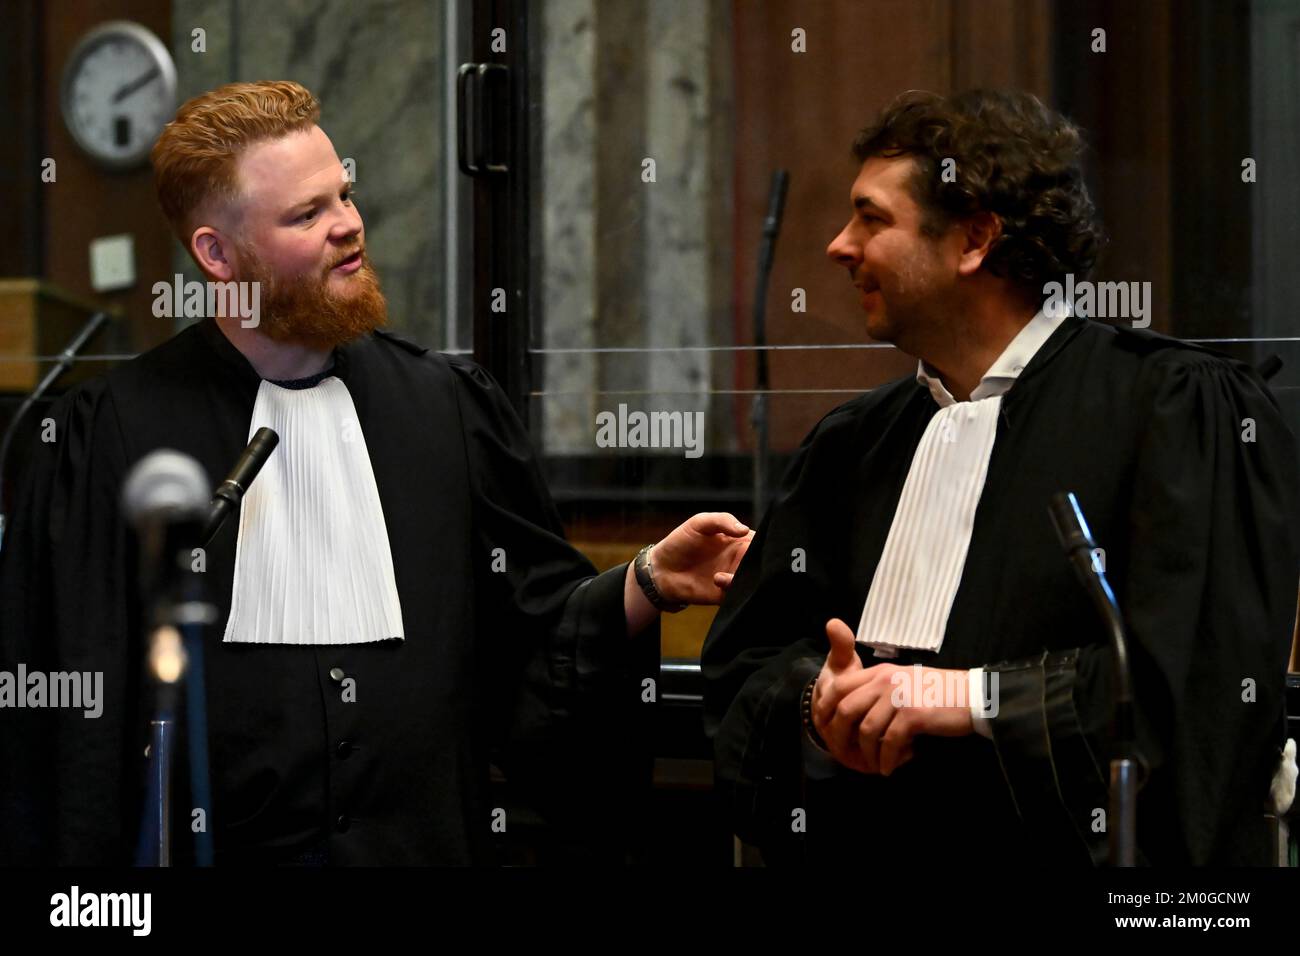 Brussels, Belgium, 06 December 2022, Lawyer Jonathan De Taye representing the accused and Lawyer Steve Lambert representing the civil parties pictured ahead of the jury constitution at the trial of Salim El Messaoudi, before the Brussels-Capital Assizes Court, in Brussels, Tuesday 06 December 2022. El Messaoudi, a man in his 40s, is accused of the murder of a 28-year-old young man, named Omar, committed in Molenbeek-Saint-Jean on December 8, 2020. BELGA PHOTO DIRK WAEM Stock Photo